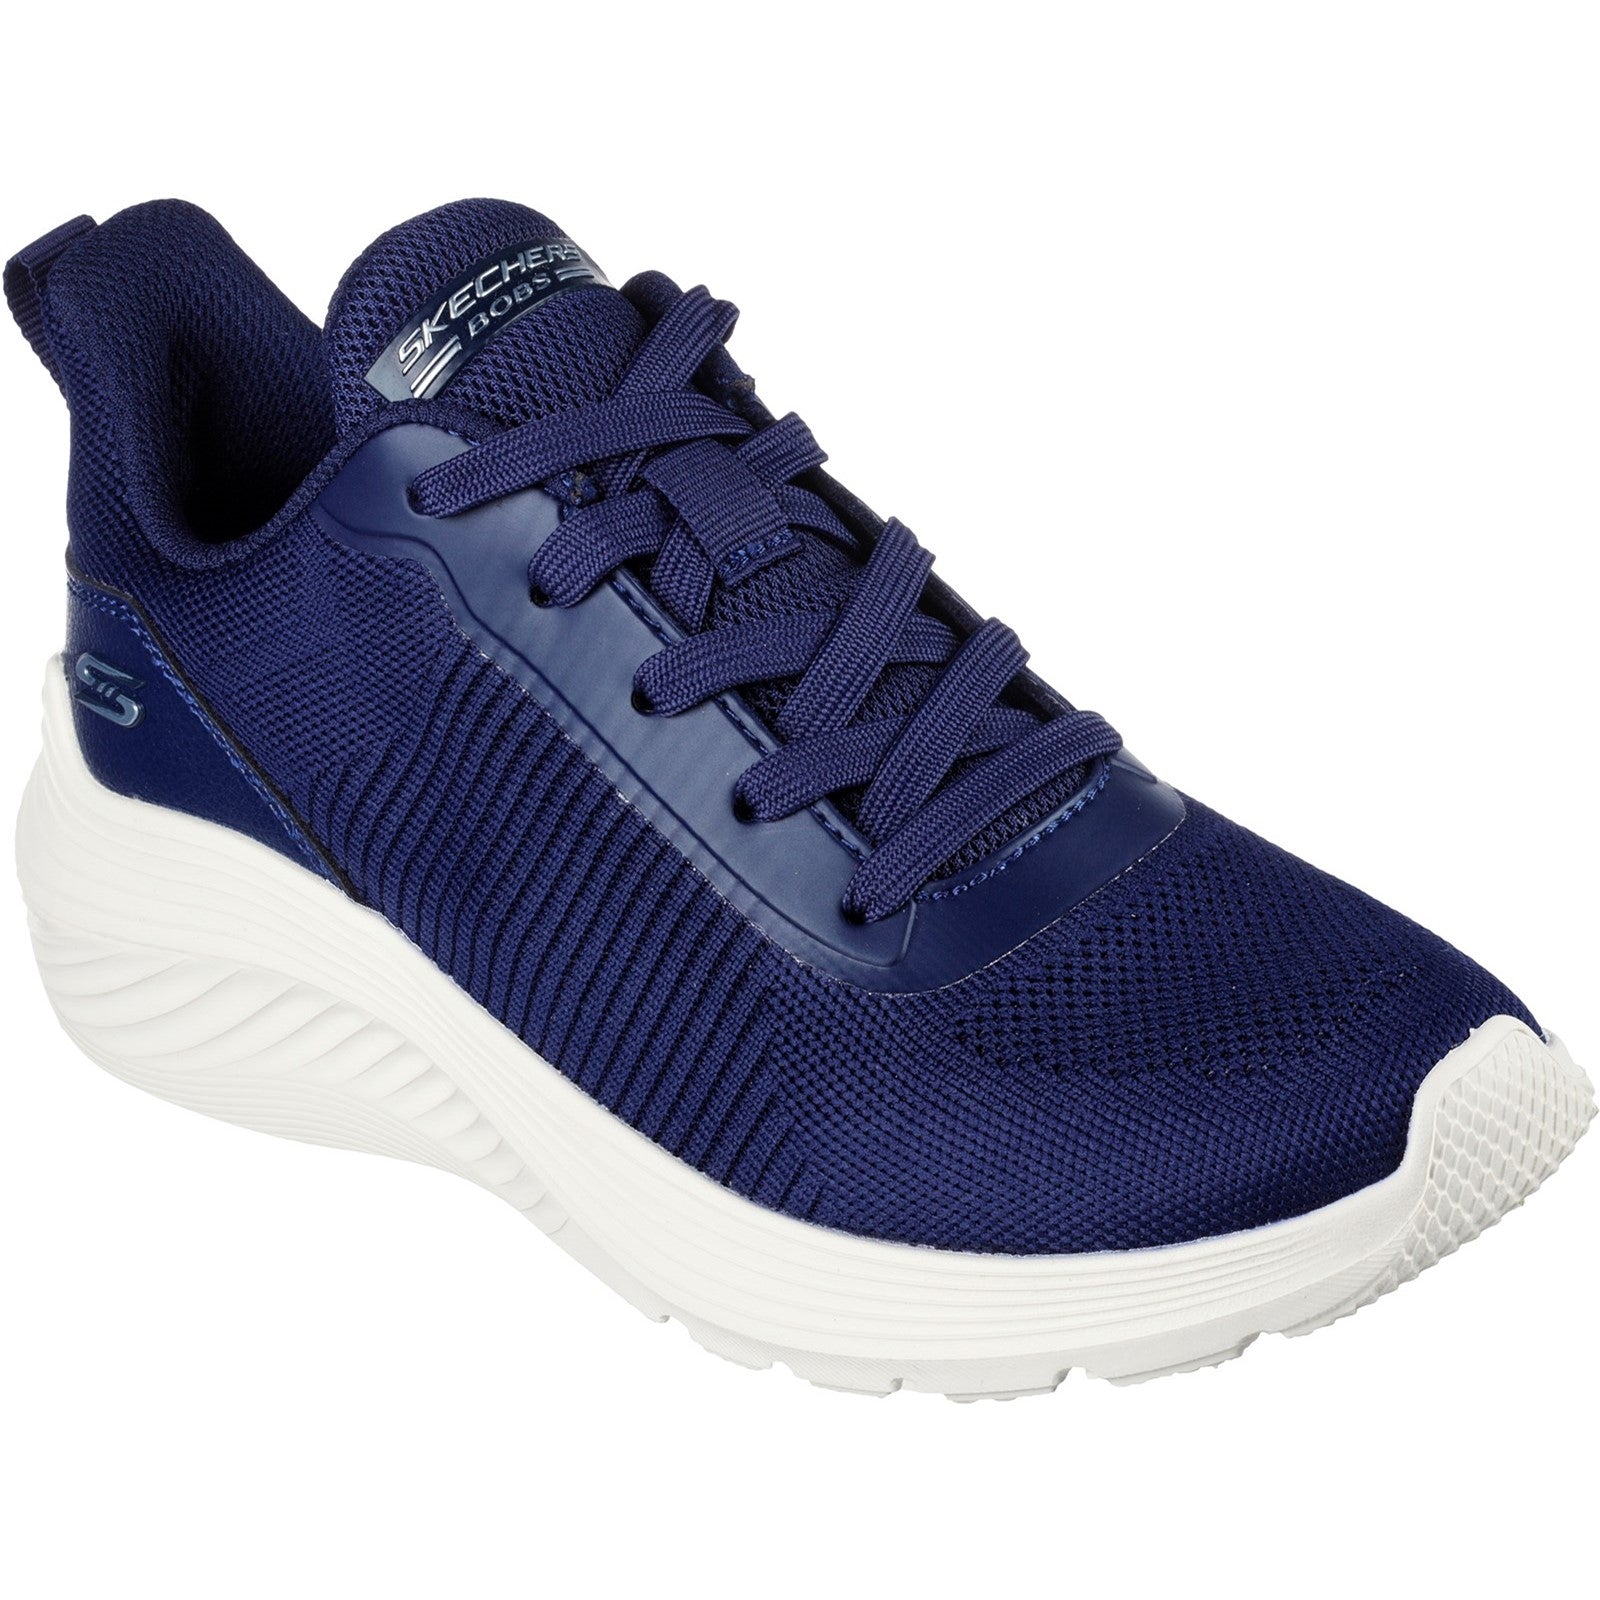 Skechers Womens Bobs Squad Waves Trainers - Navy